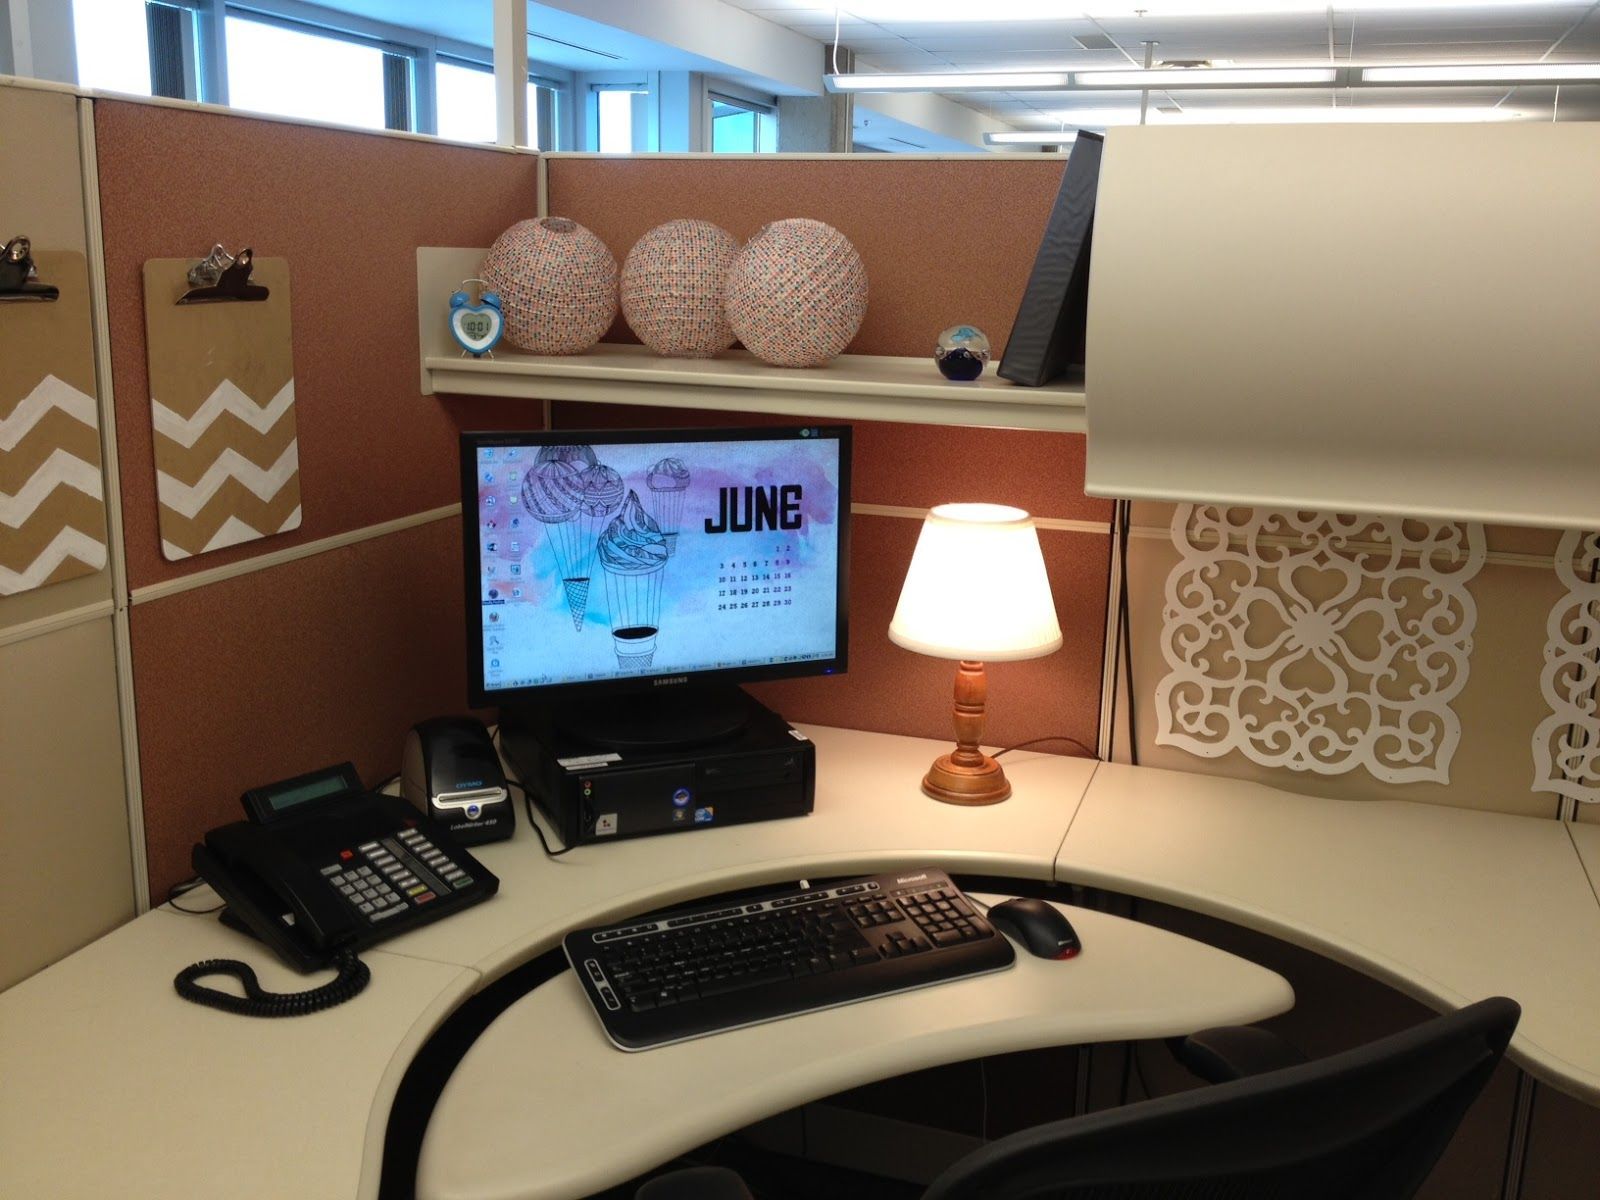 20 Cubicle Decor Ideas For Your Workspace - DIY for Offices. - DECORHUBNG